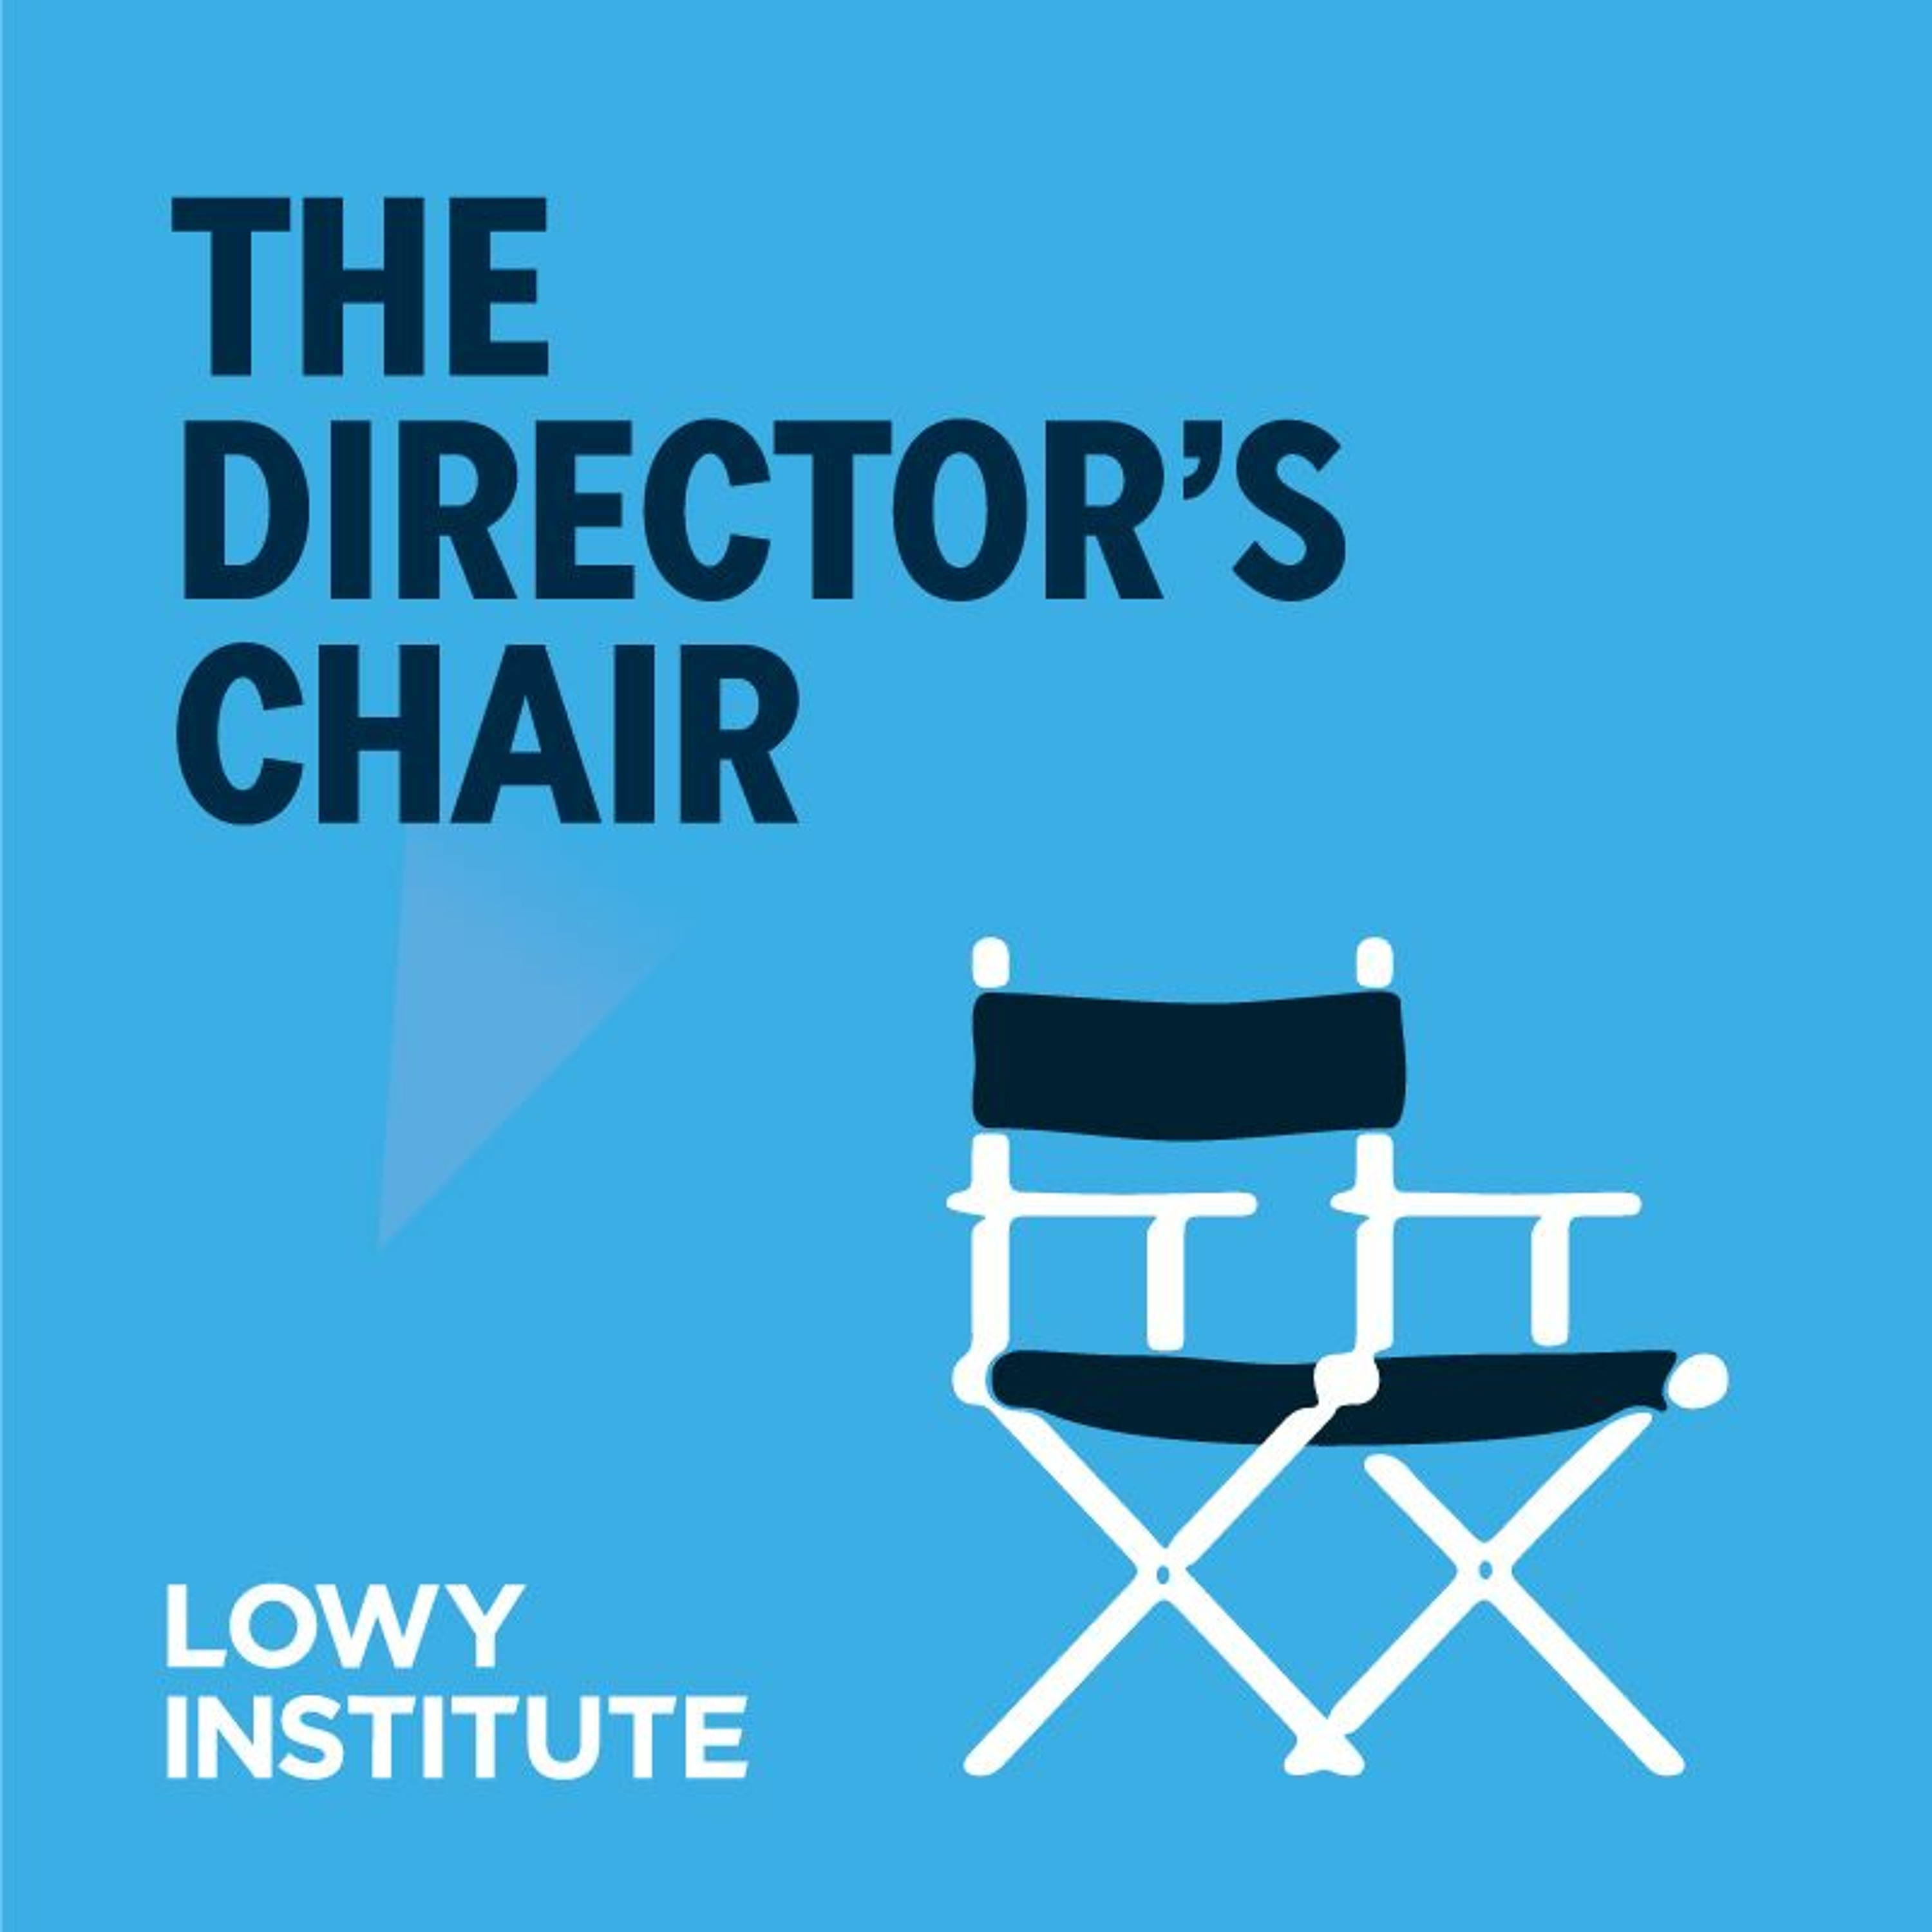 The Director’s Chair: Matt Pottinger on his career, working for President Trump, China and COVID.